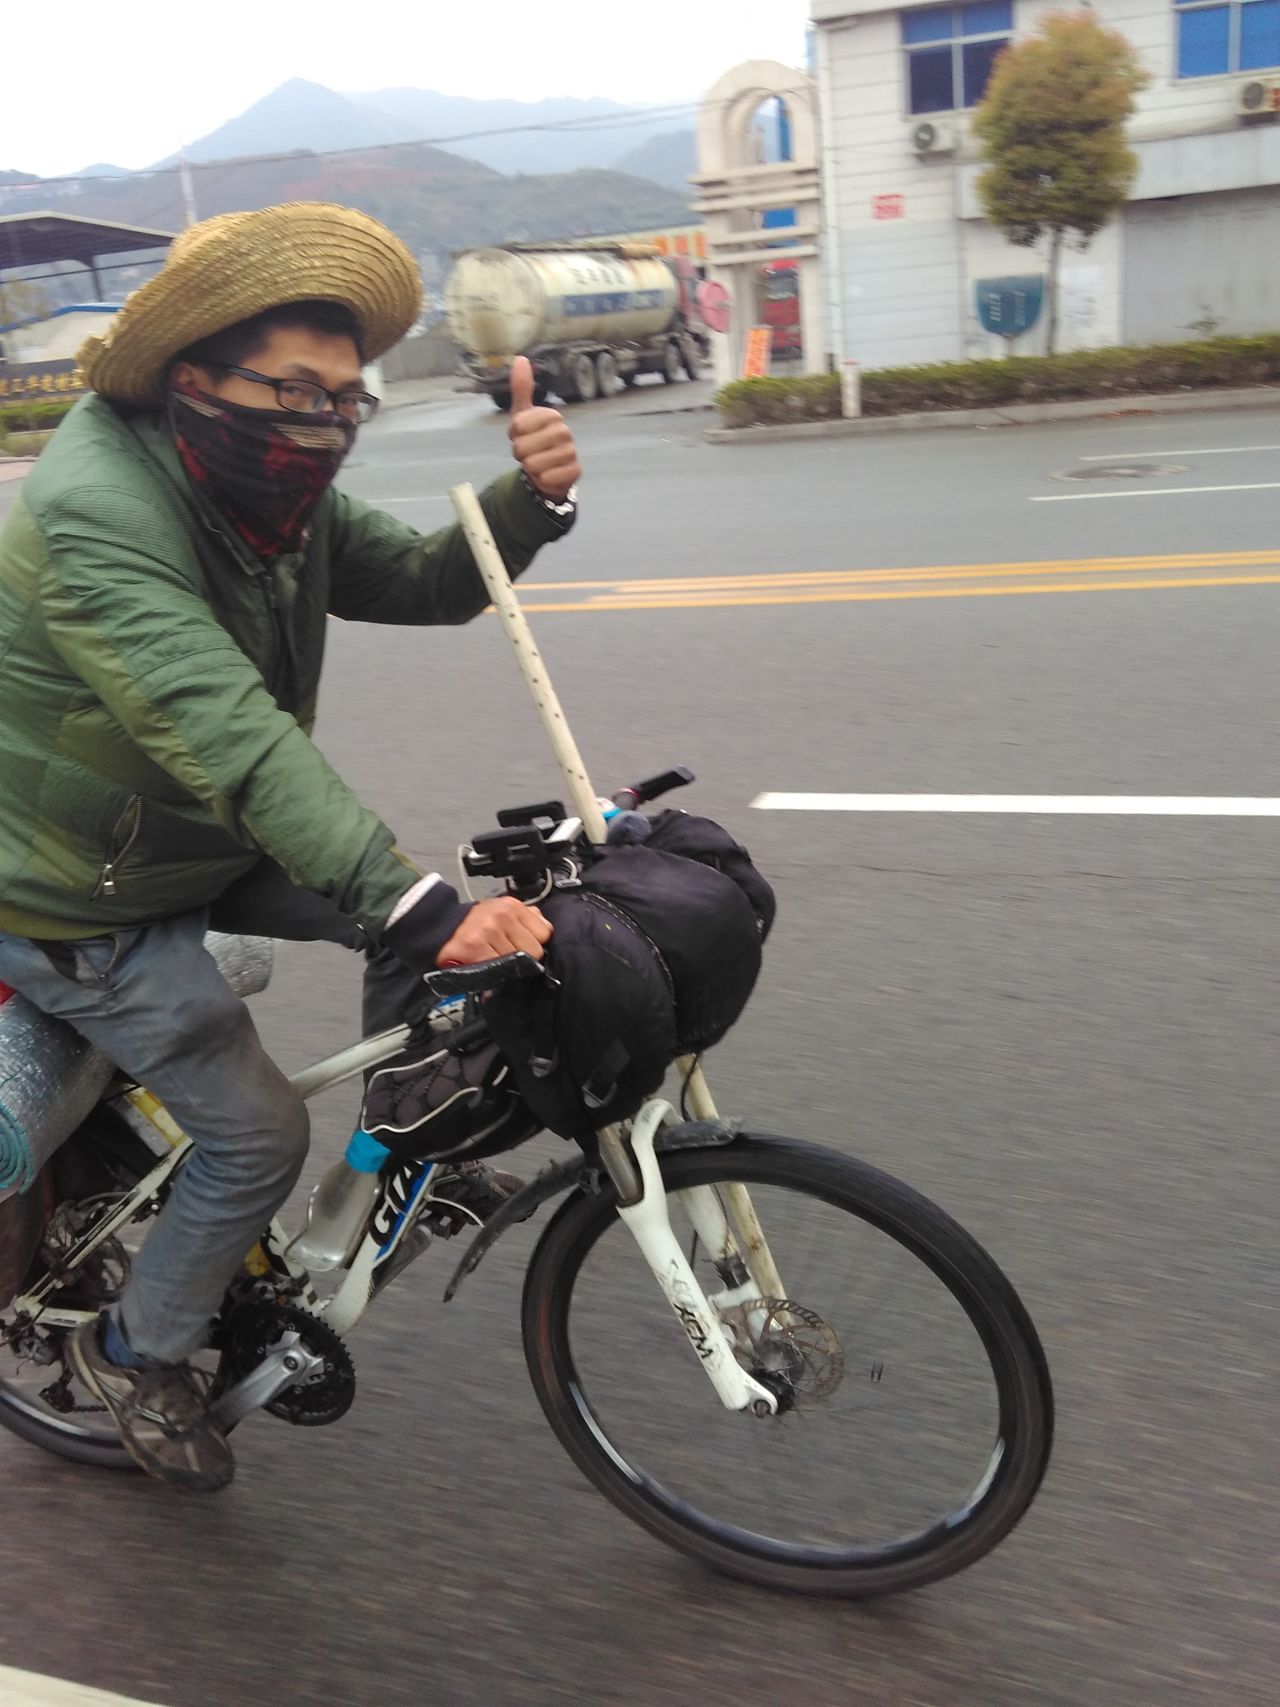 Wang and his bike in Fujian Province, just before heading into Guangdong, where the bike was taken. Wang has spent 460 days covering more than 29,000 kilometers.